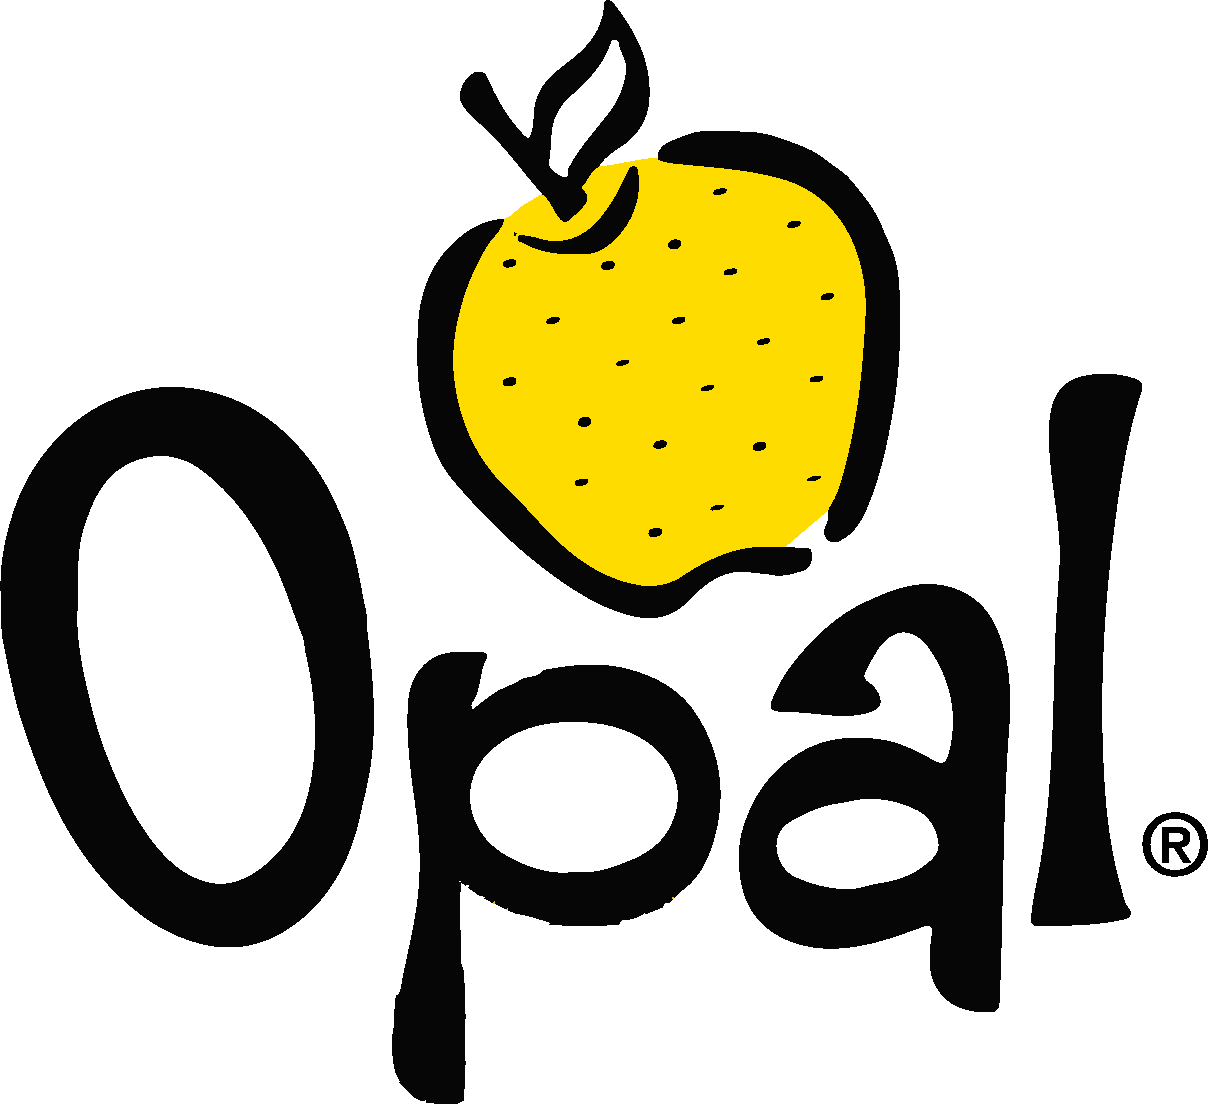 Celebrate National Opal Apples Day December 9th - Produce Blue Book